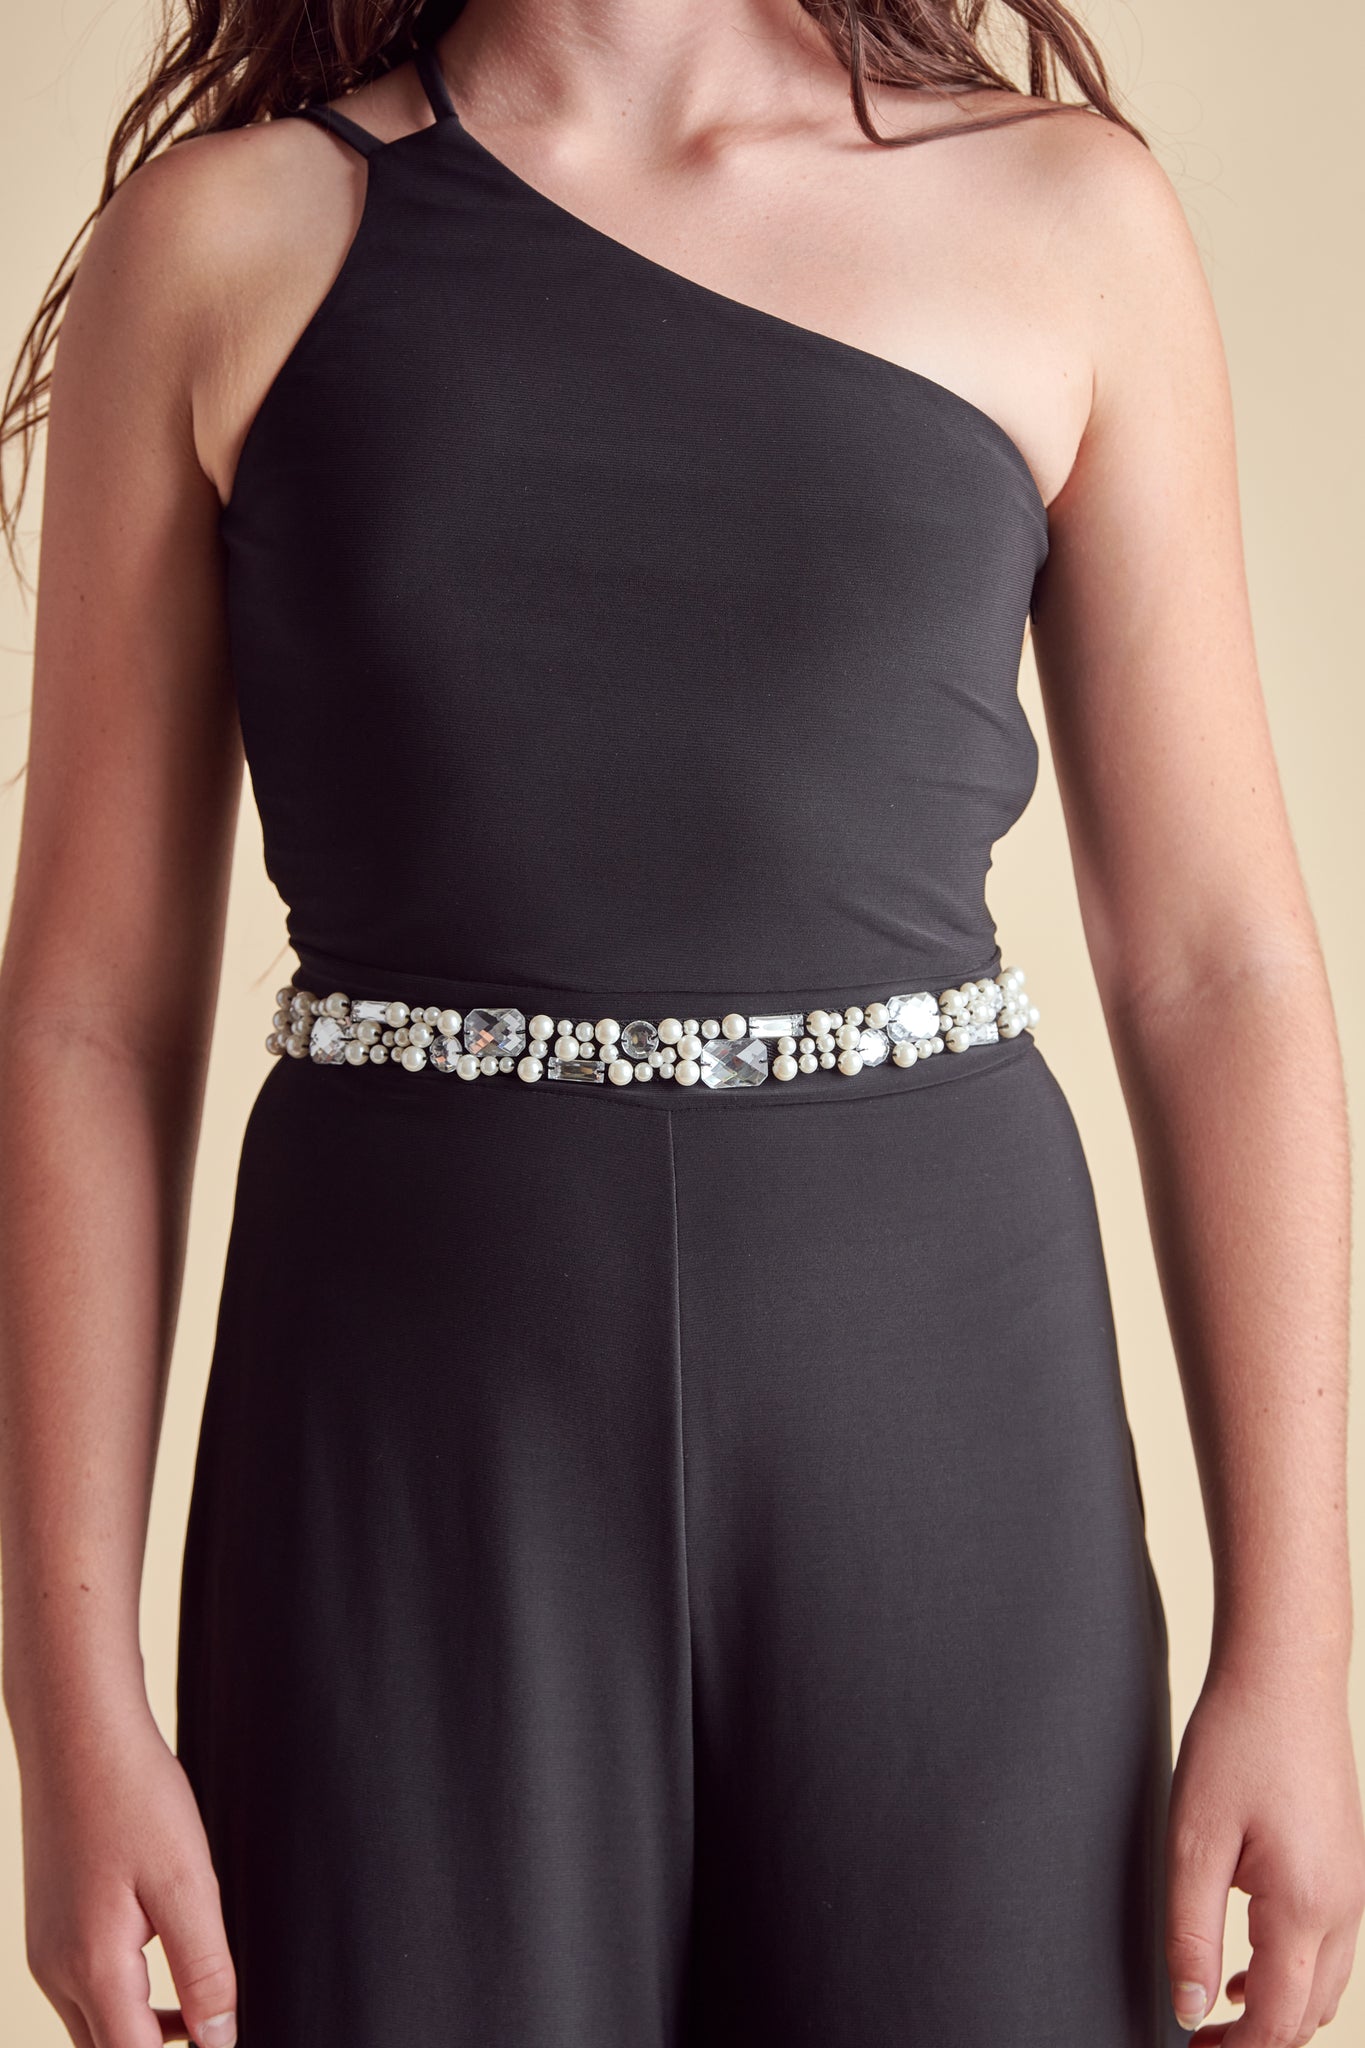 Girl in a black elasticated belt with pearl and gems.